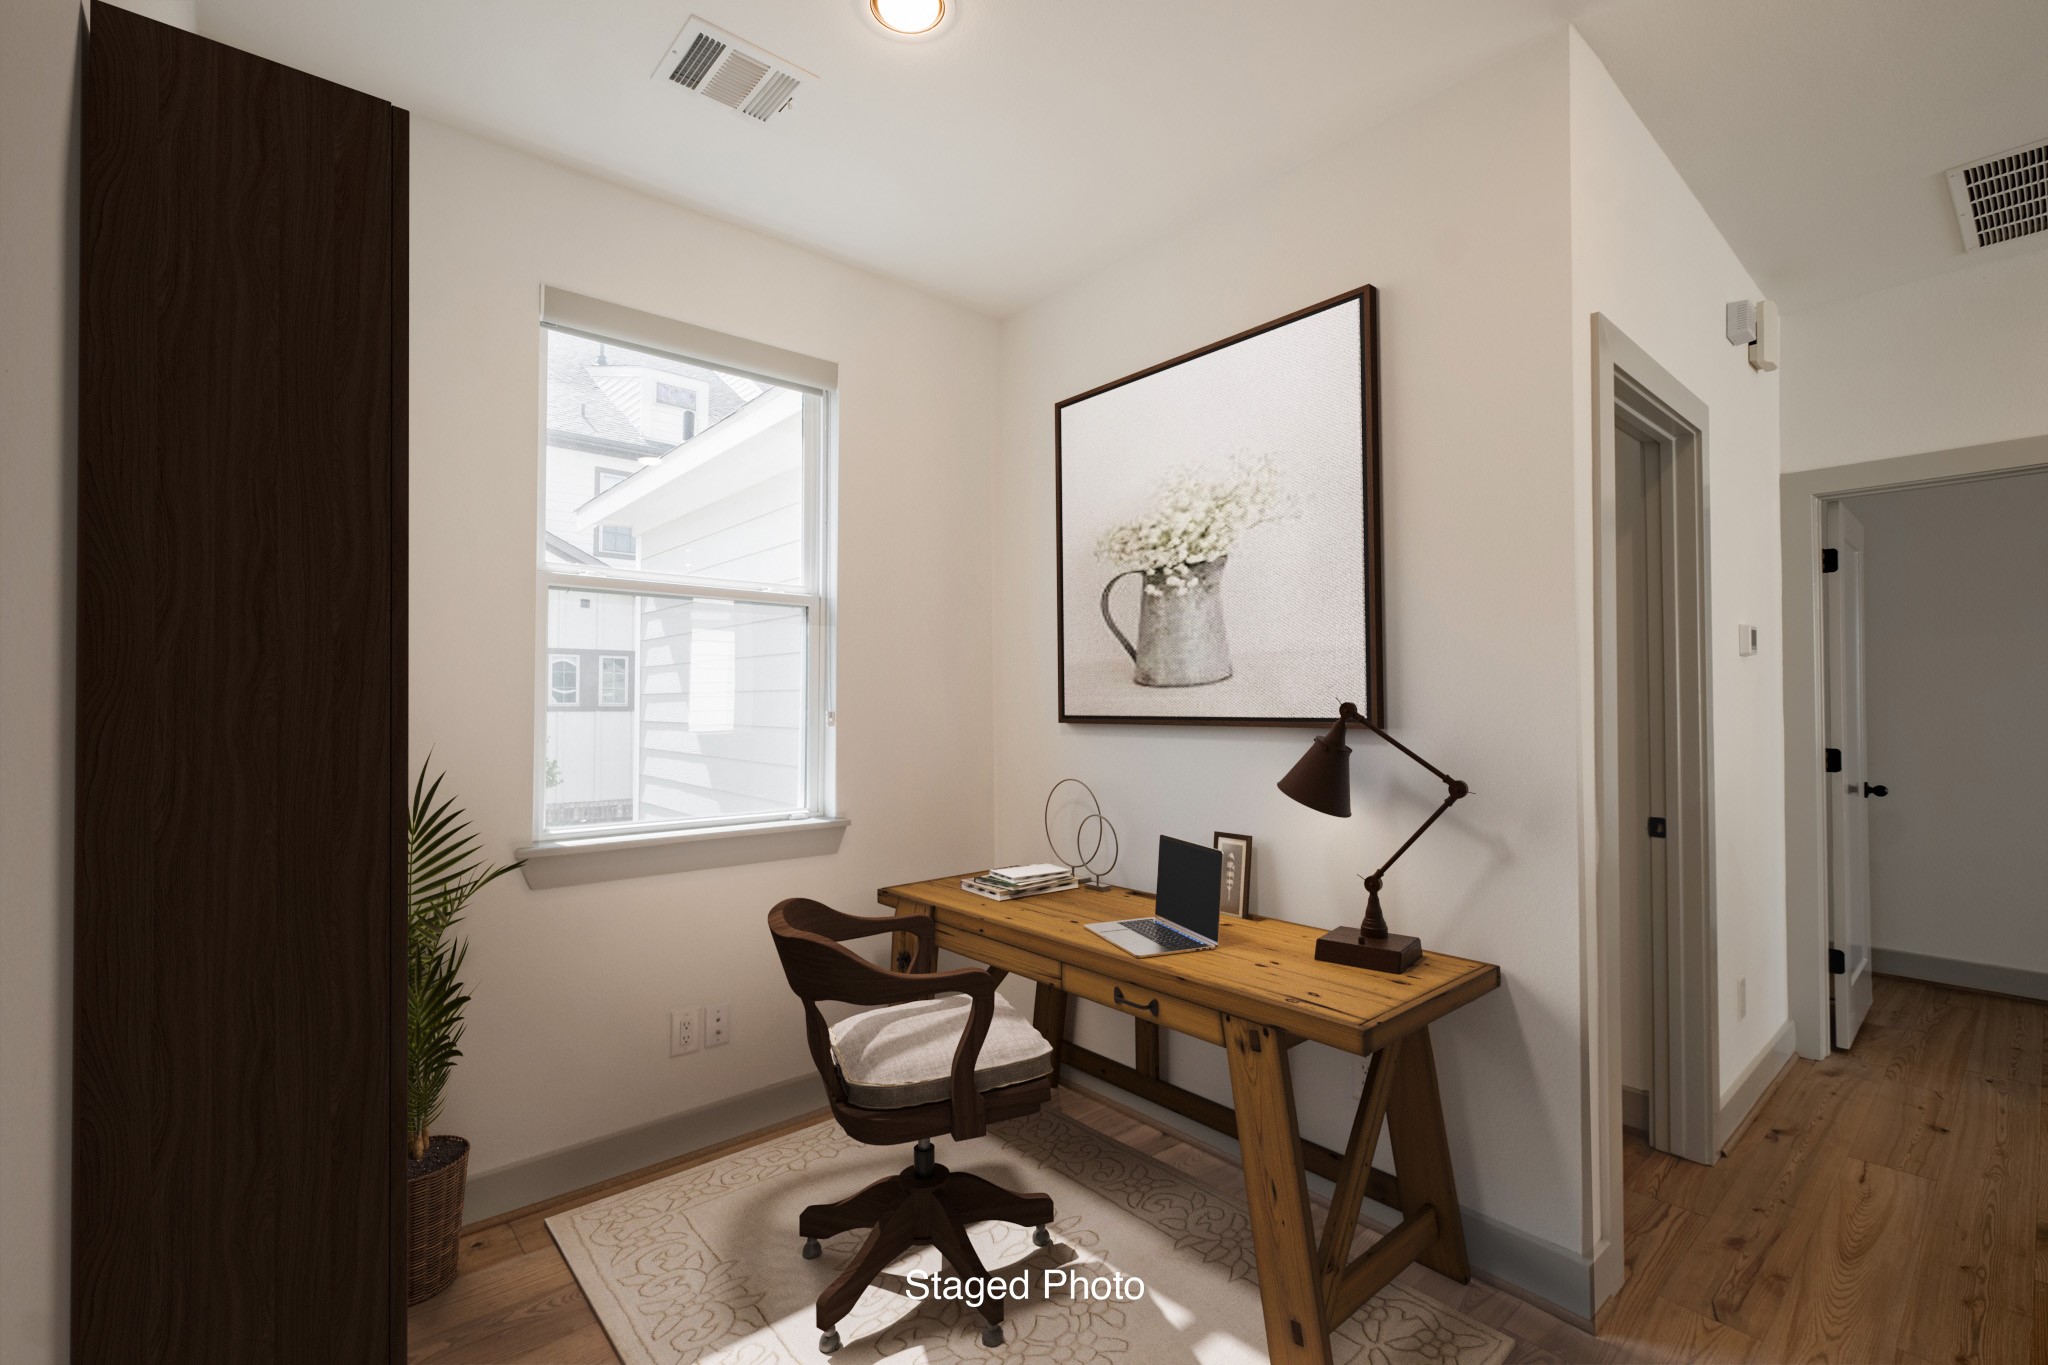 Upstairs at the top of the stairwell is this great study nook - it could serve as a second office, a primary office